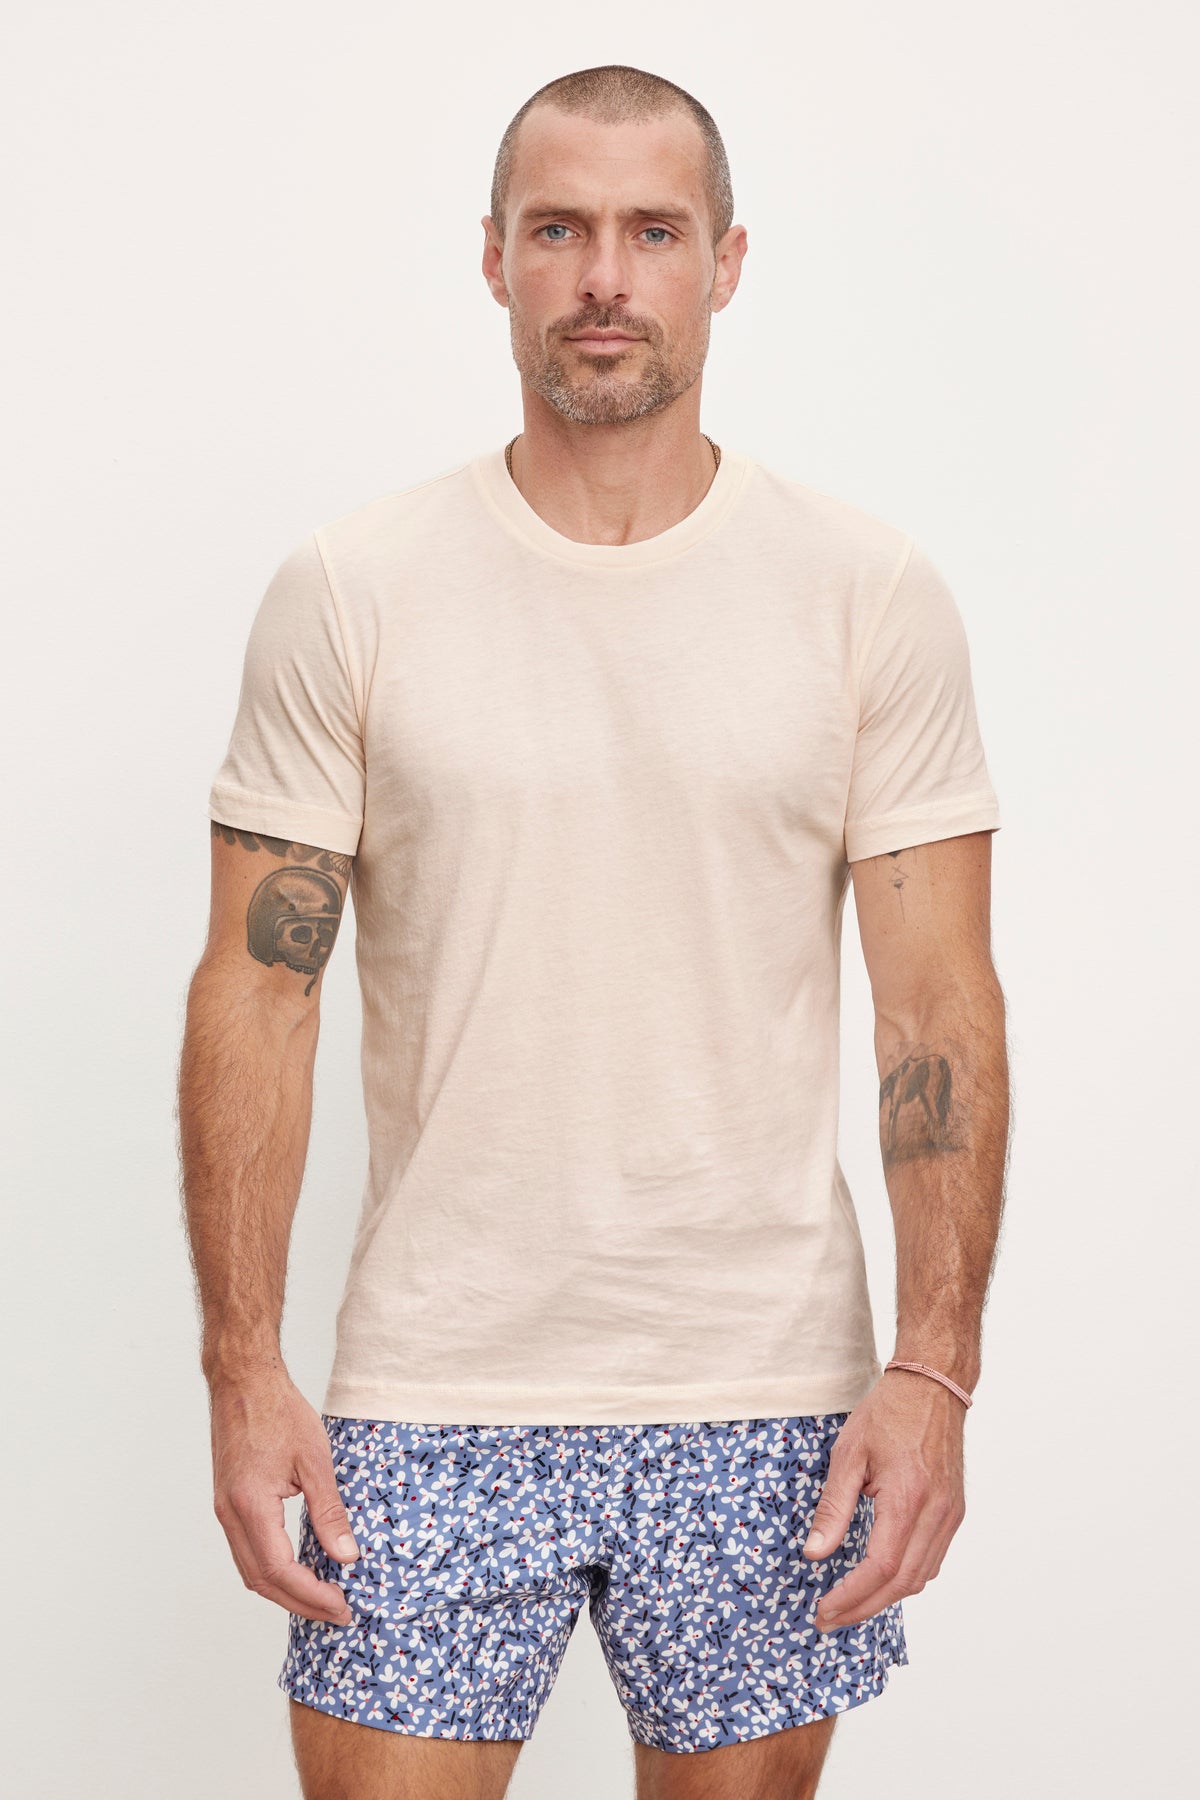   A man with tattoos on his arms wearing a Velvet by Graham & Spencer RANDY CREW NECK TEE and patterned blue shorts against a plain background. 